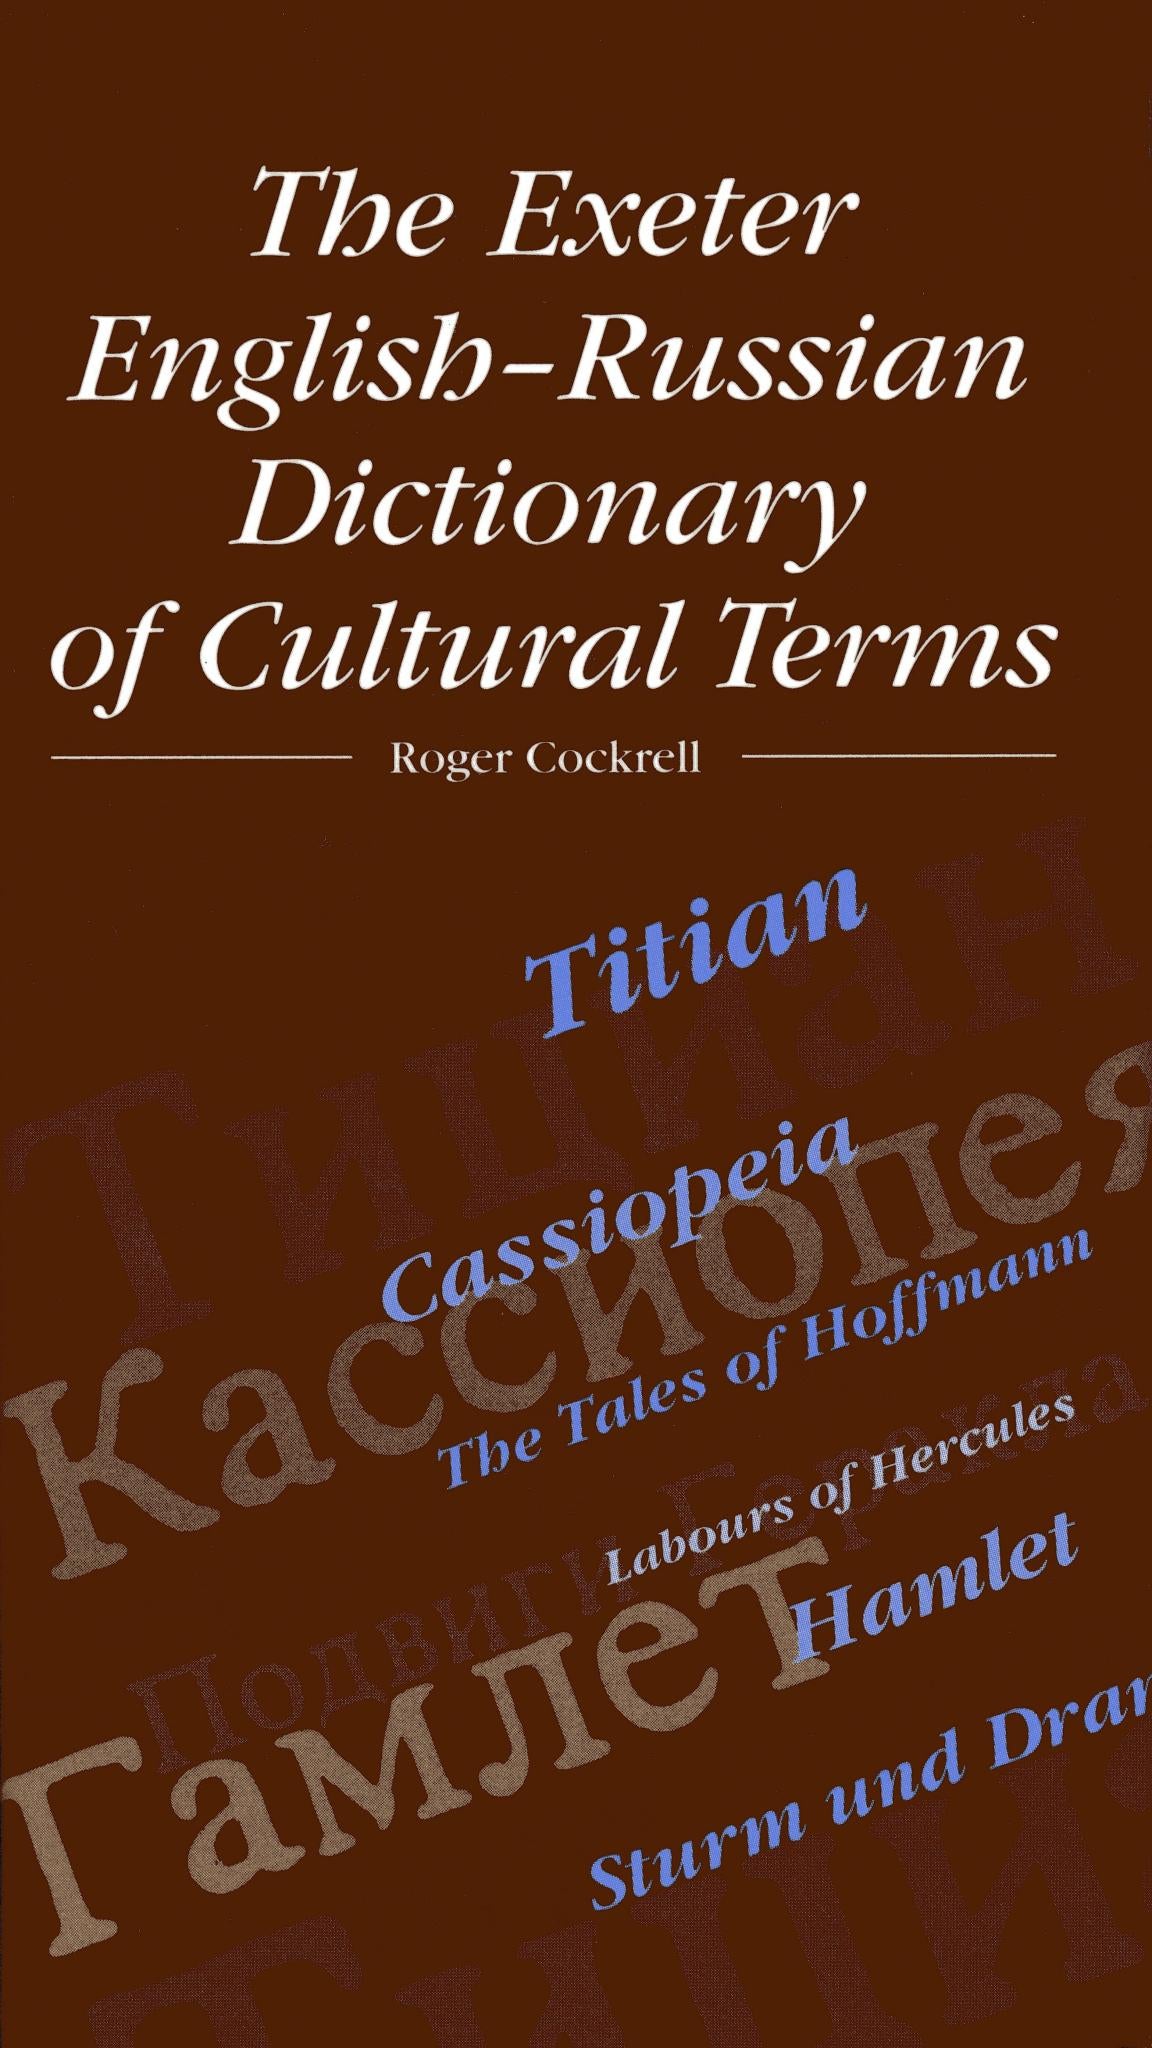 The Exeter English-Russian Dictionary of Cultural Terms